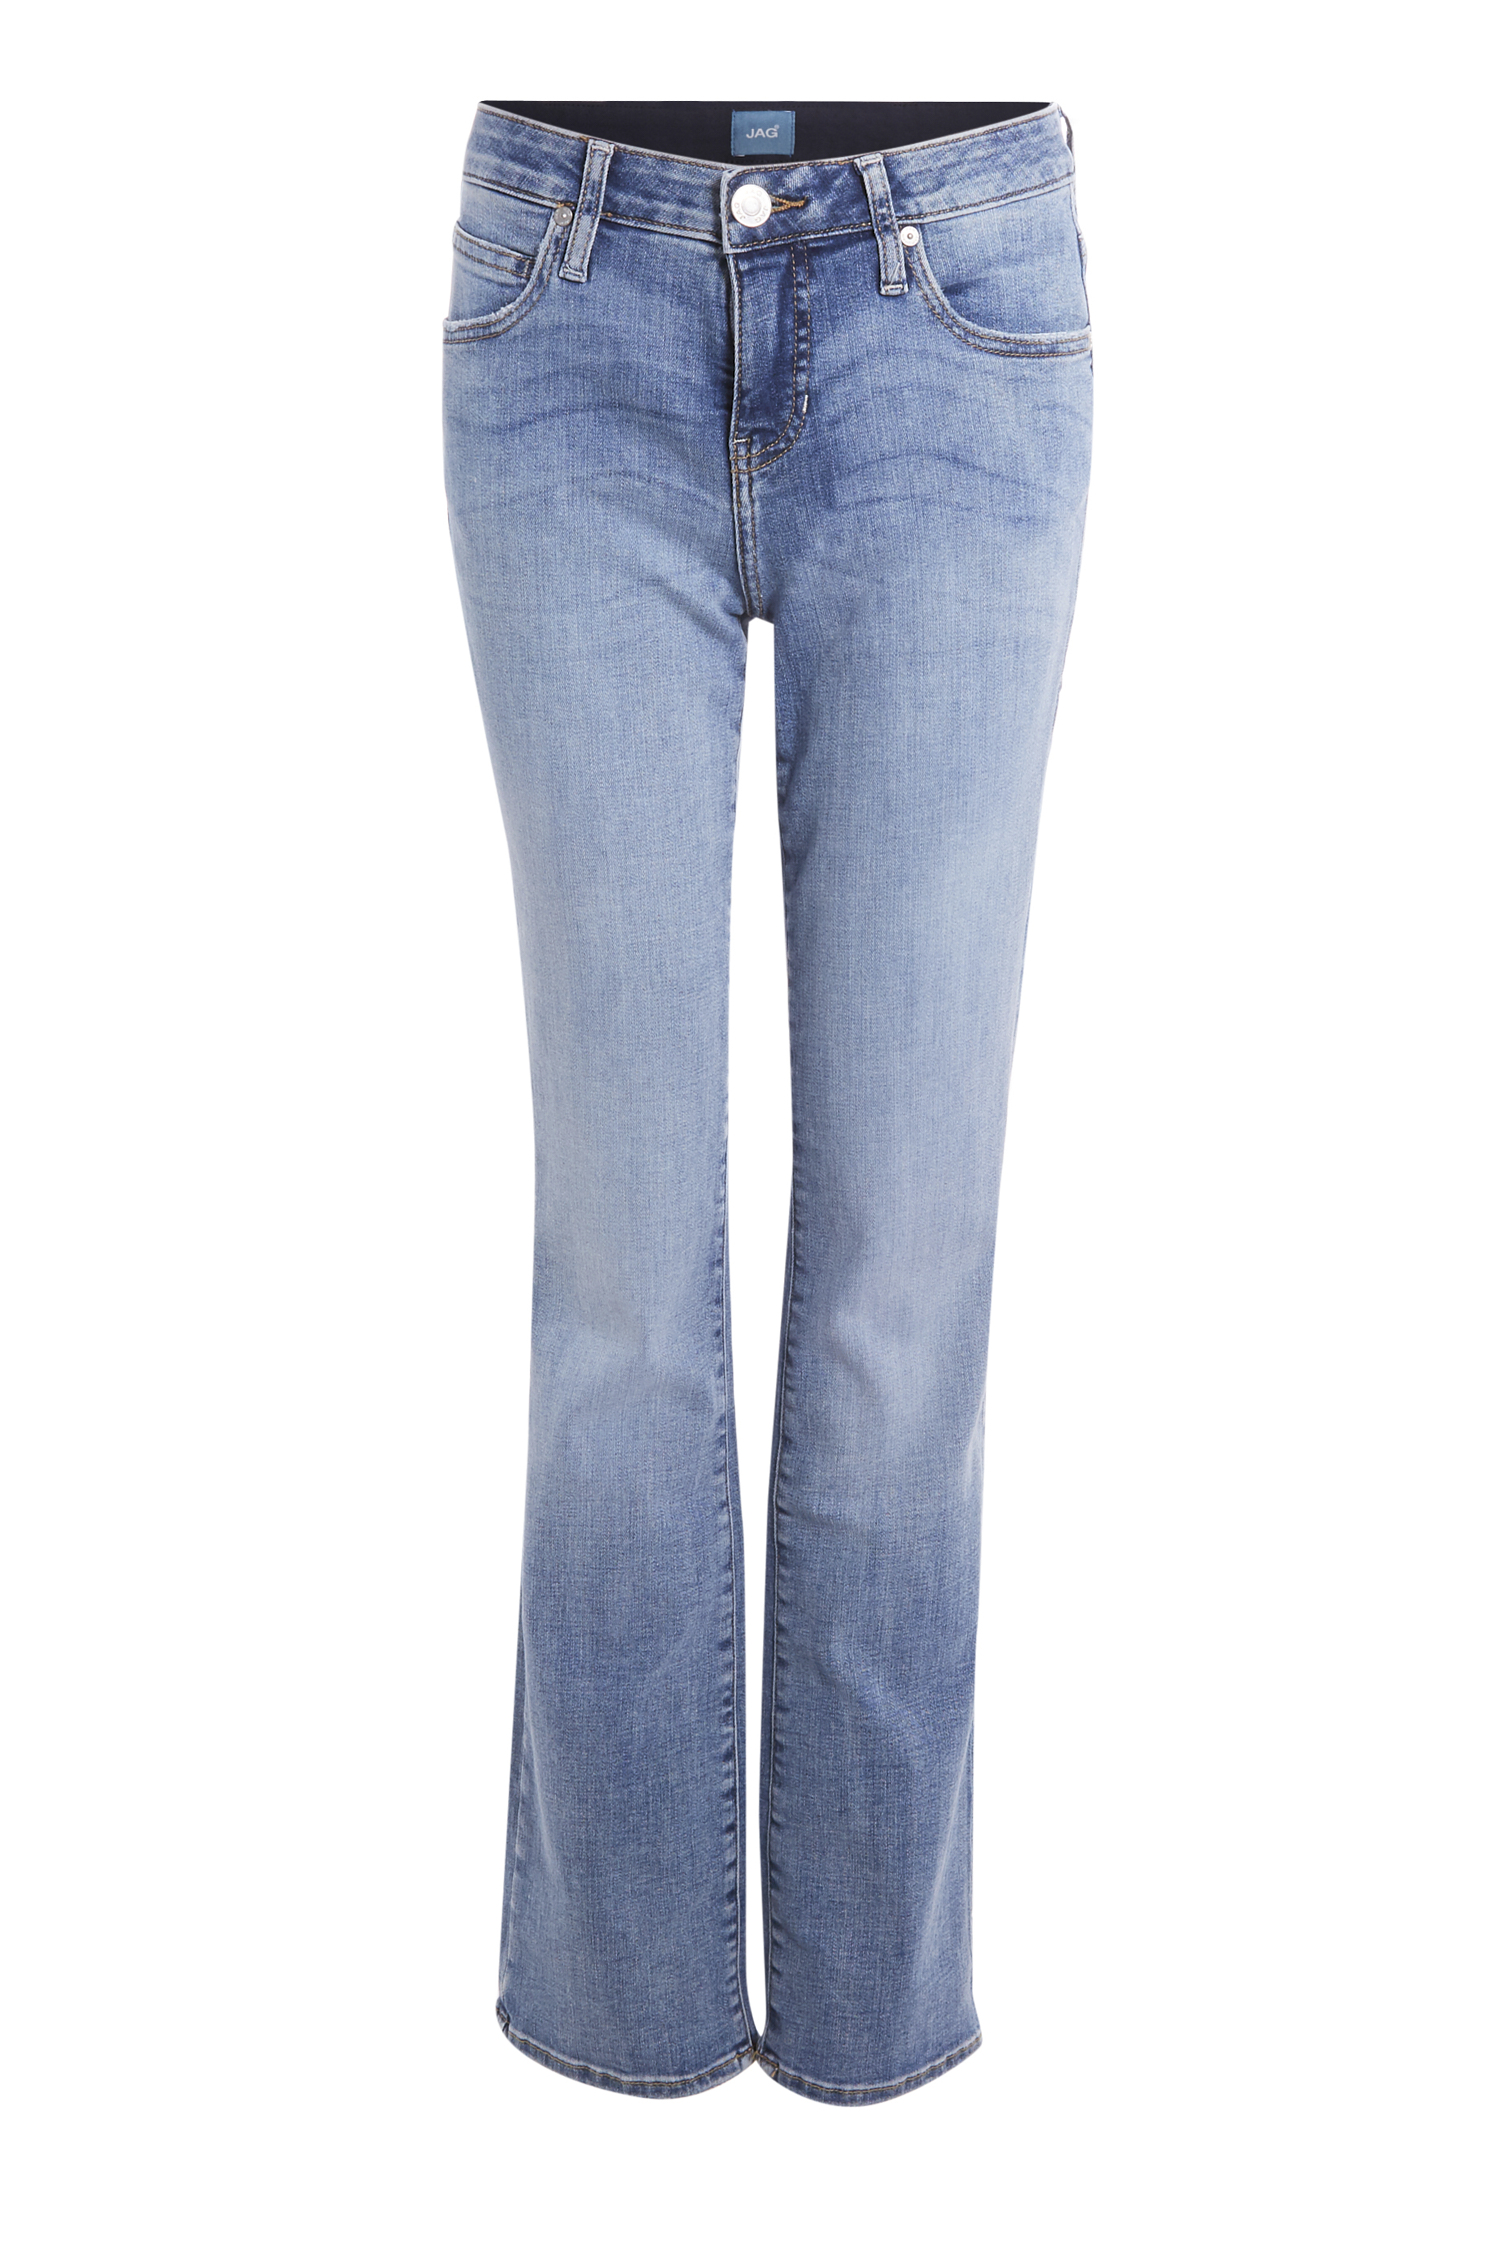 JAG Mid Rise Bootcut Jean